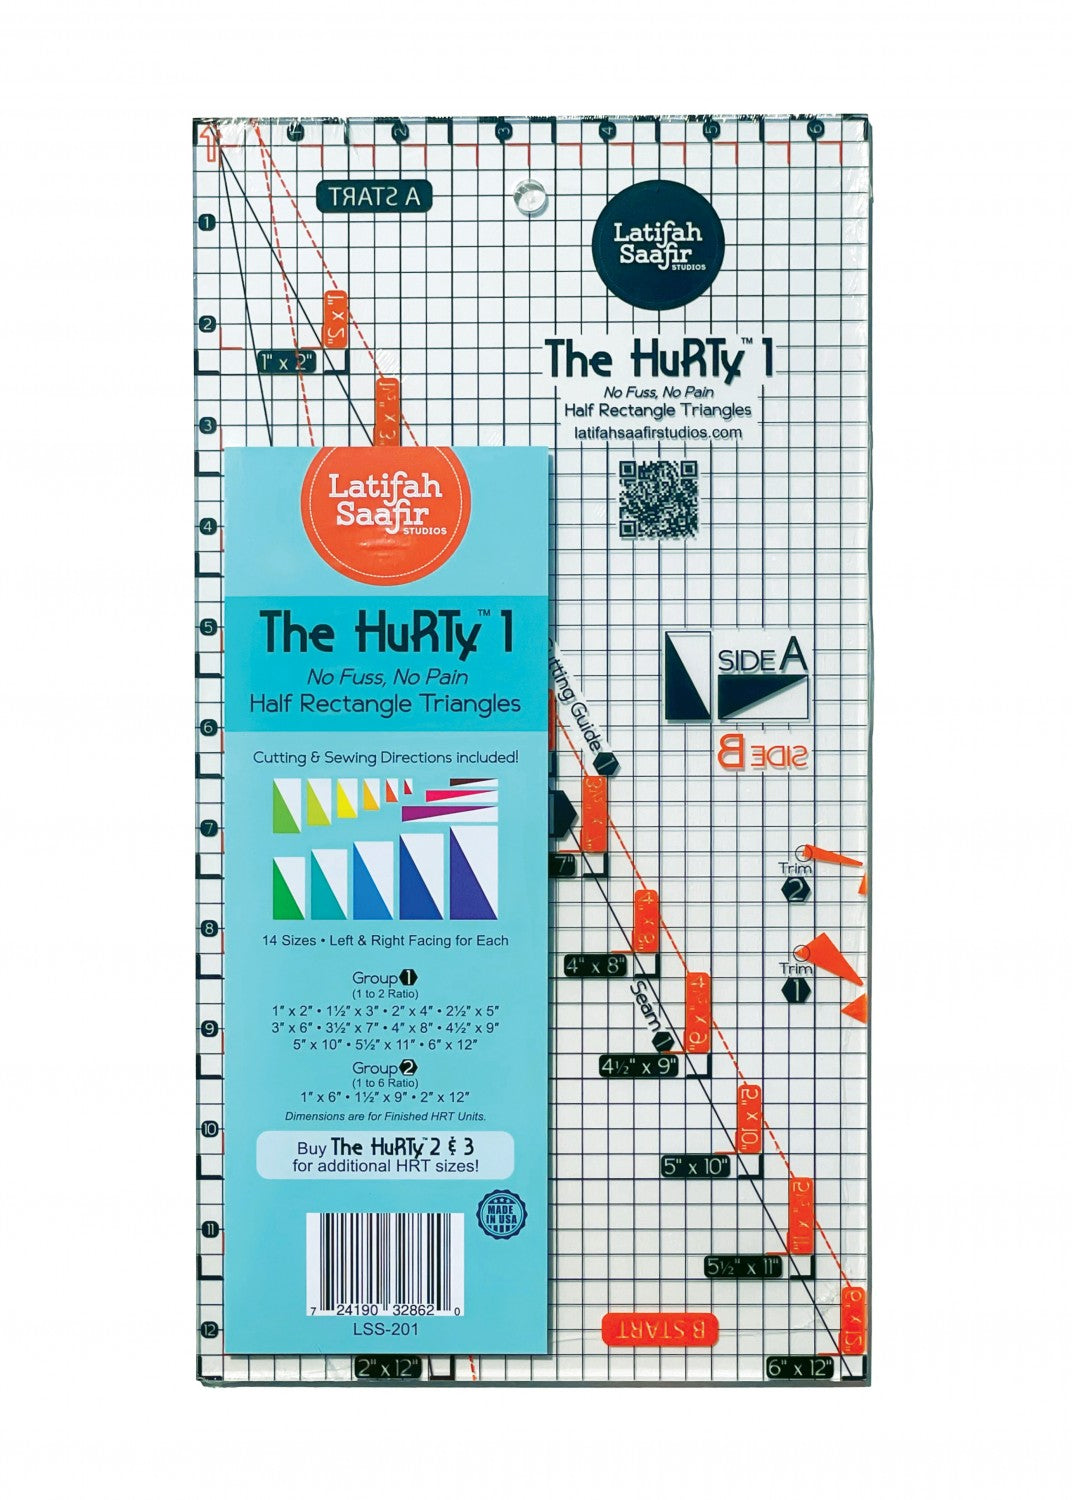 The HuRTy 1 Quilt Template by Latifah Saafir for 14 Half Rectangle Triangles - Regular and Skinny